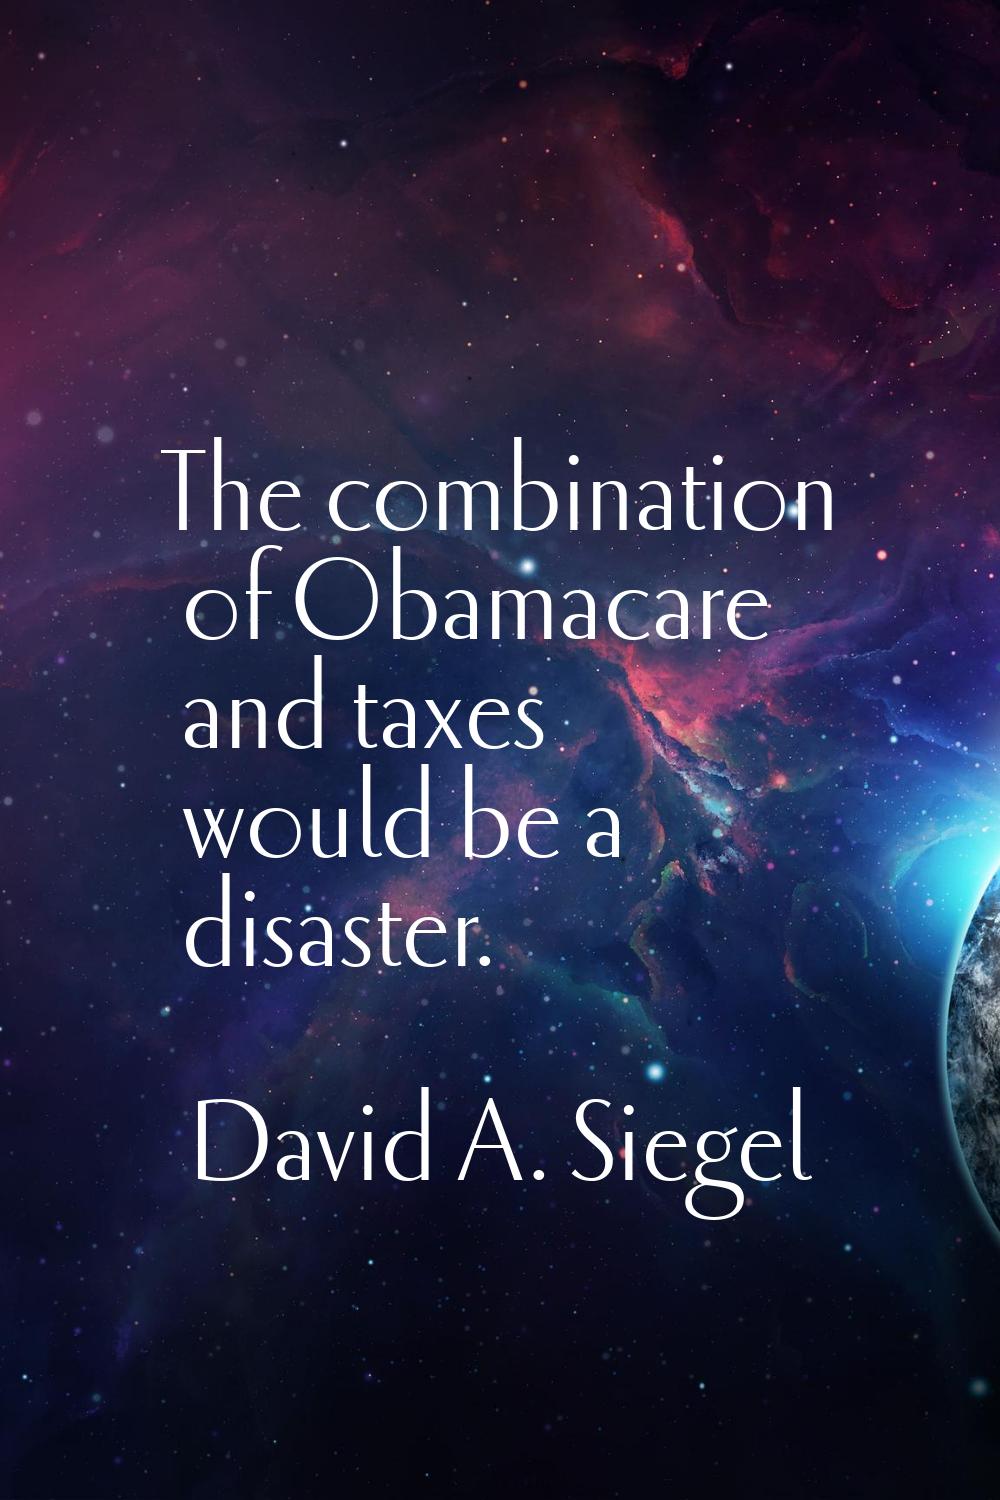 The combination of Obamacare and taxes would be a disaster.